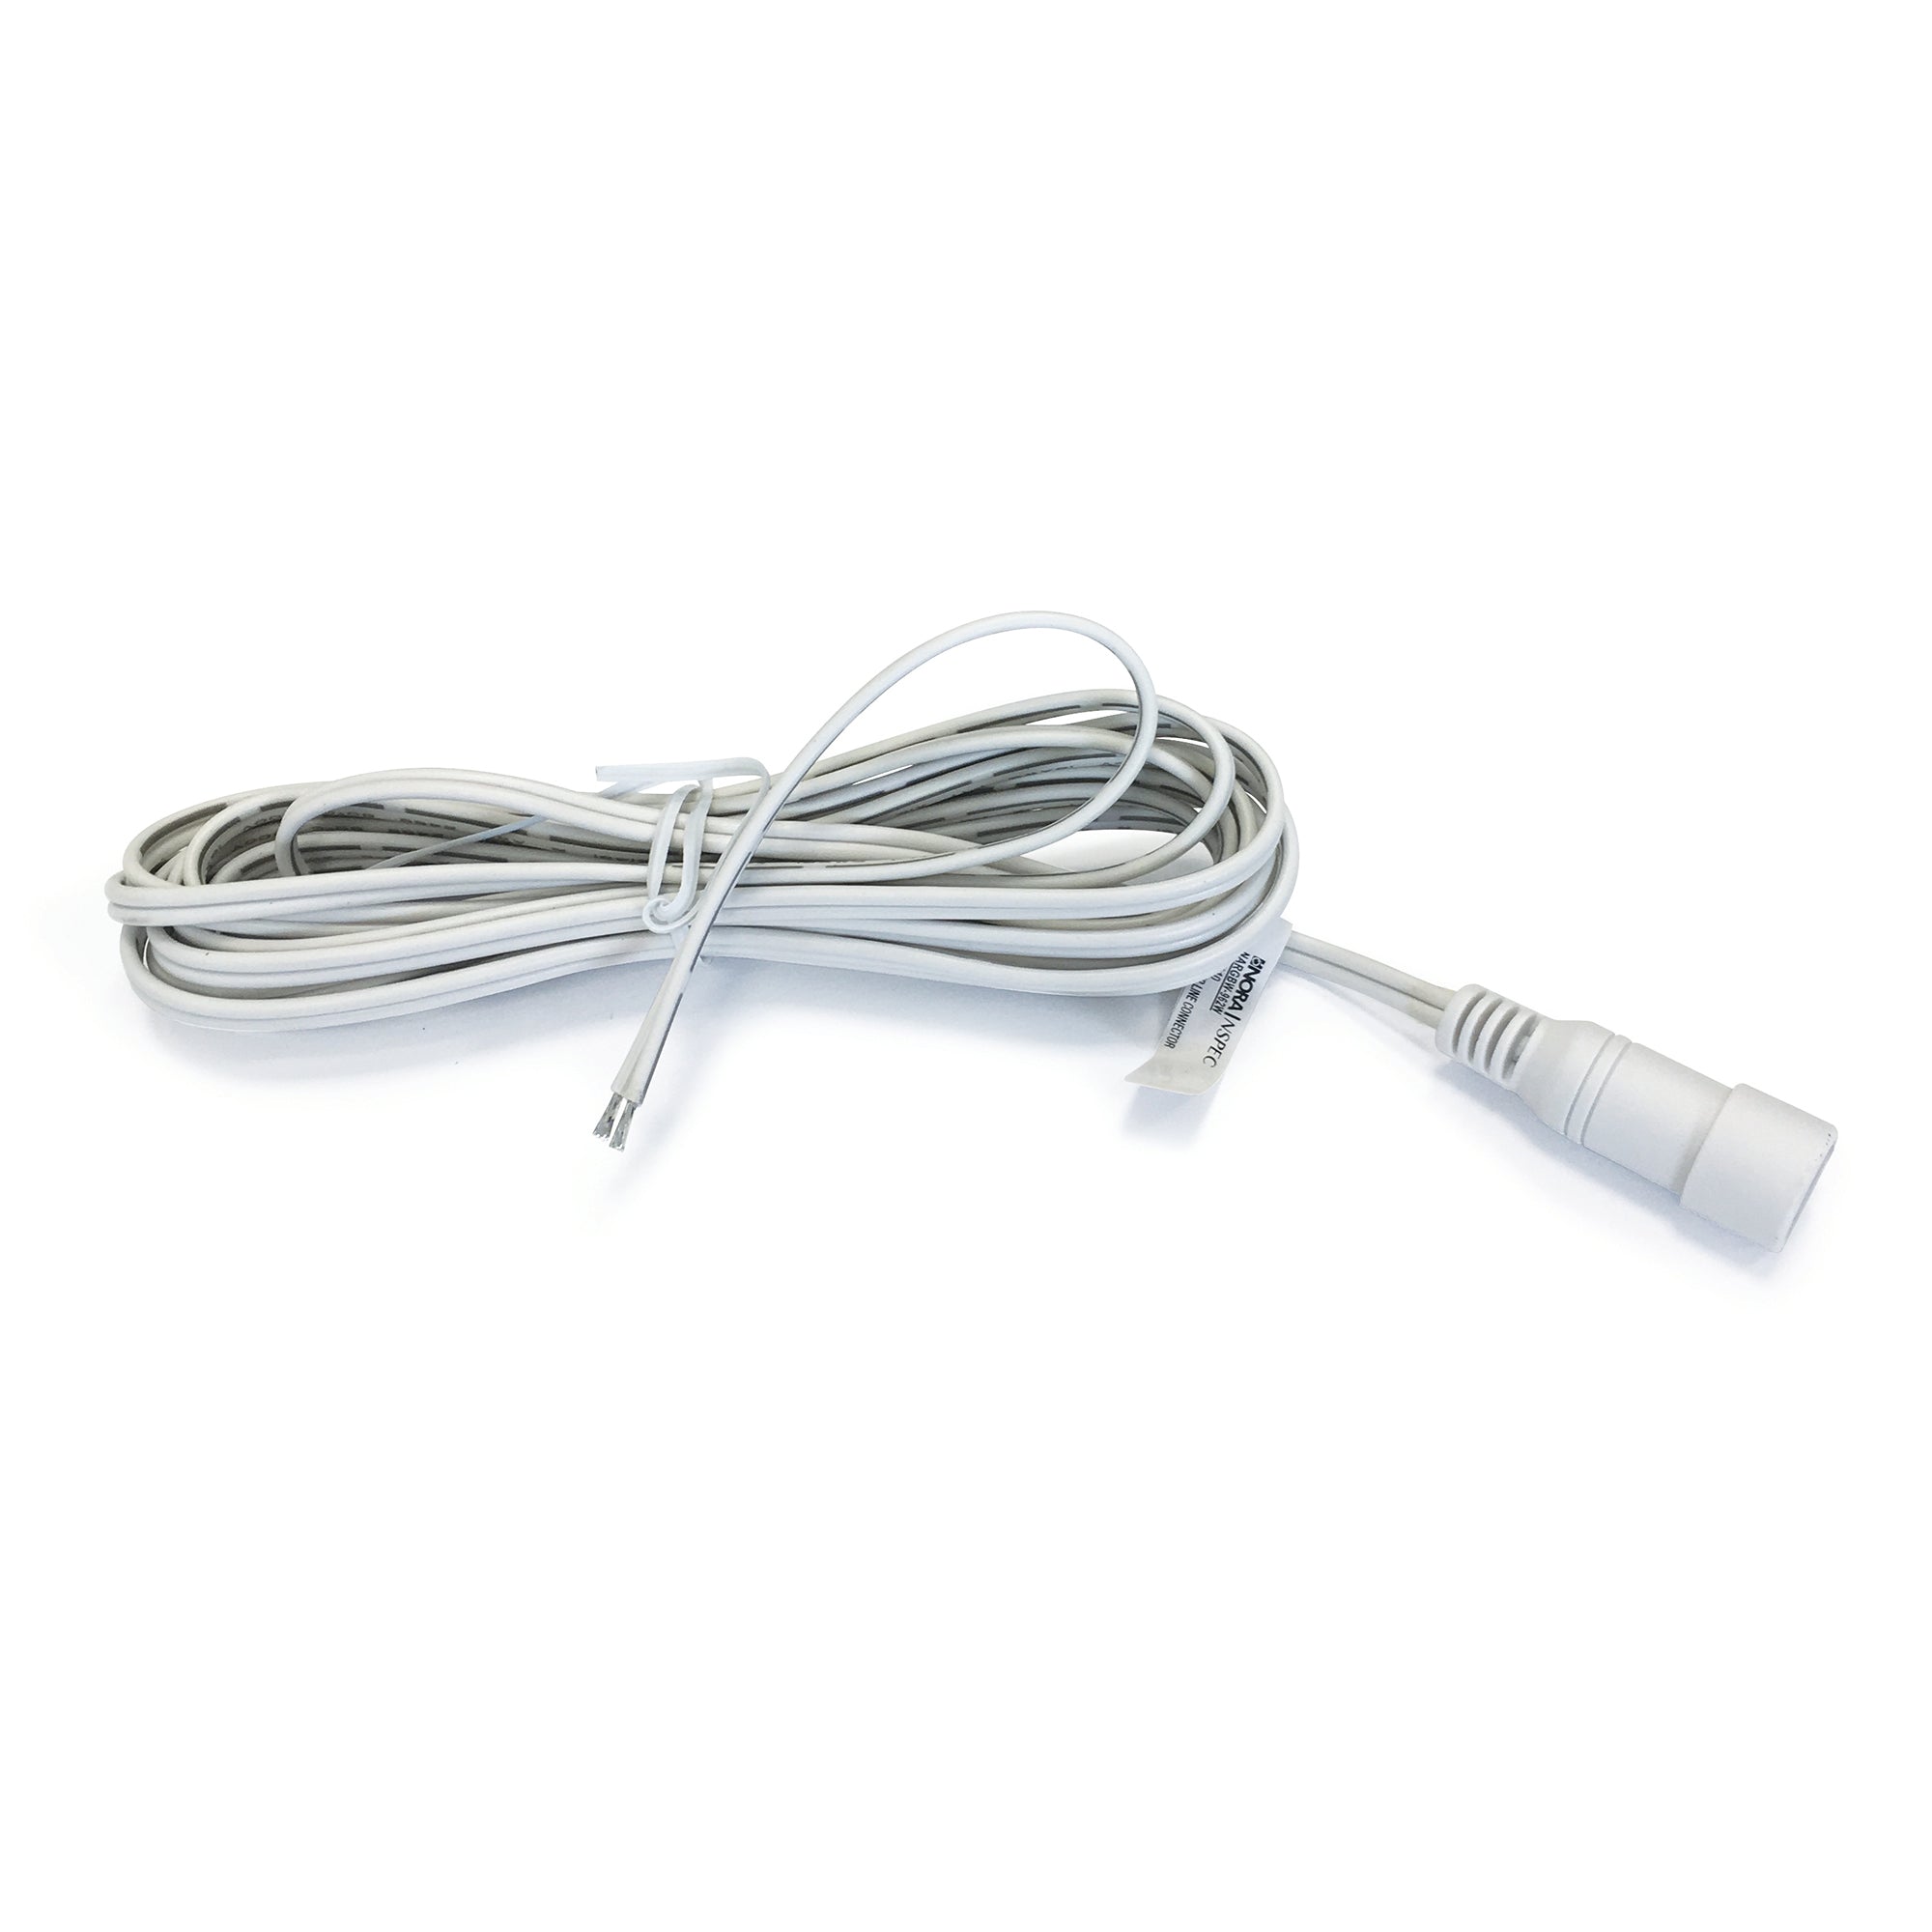 Nora Lighting NARGB-762W - Accent / Undercabinet - 10' Controller Power Line Connector for RGB Controller